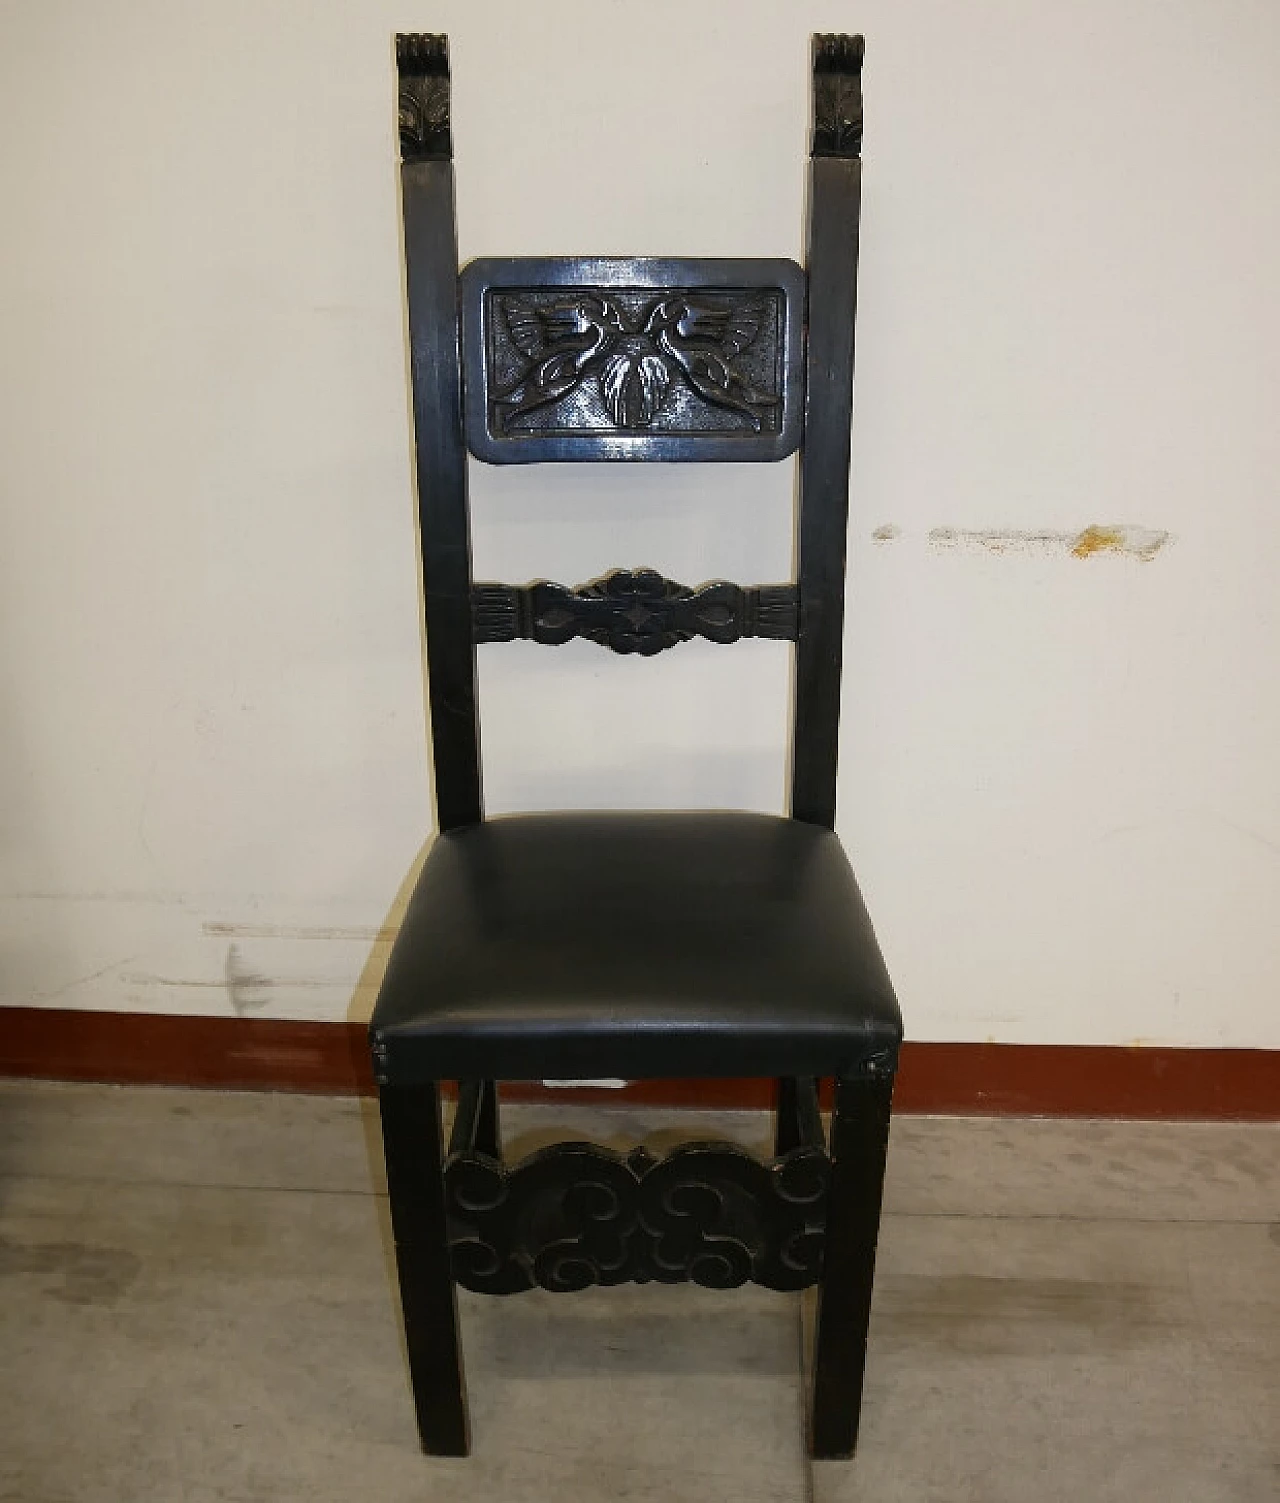 6 Renaissance-style chairs in black-stained wood, 1930s 1375413